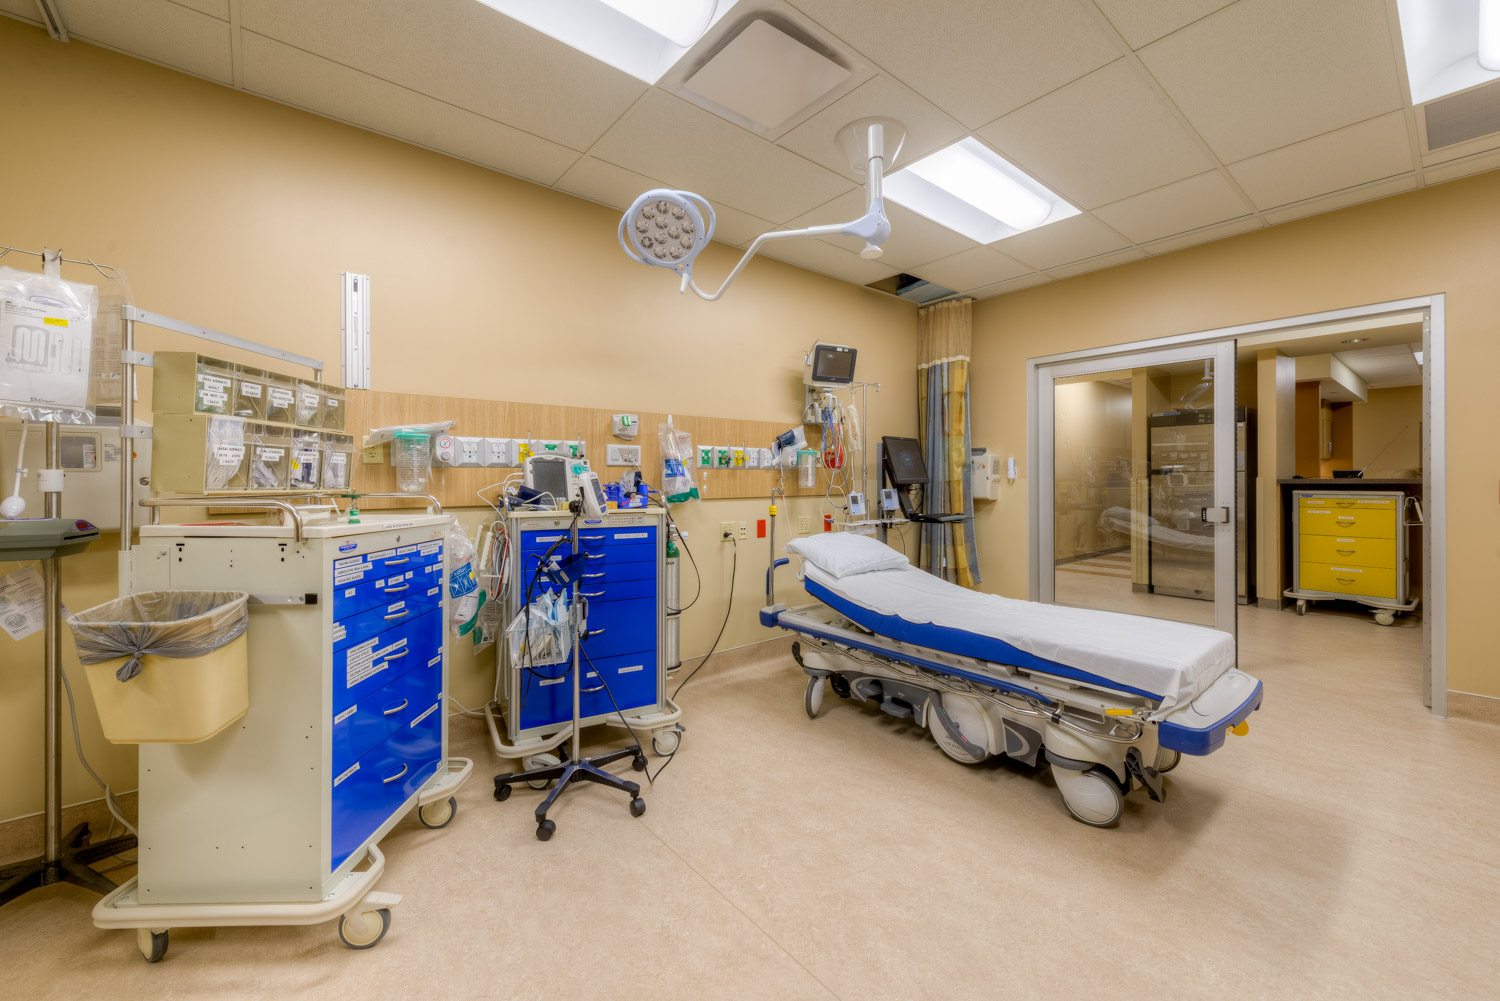 20160918_westernwisconsinhealth_replacementhospital_0729_hdr_150dpi_1500px